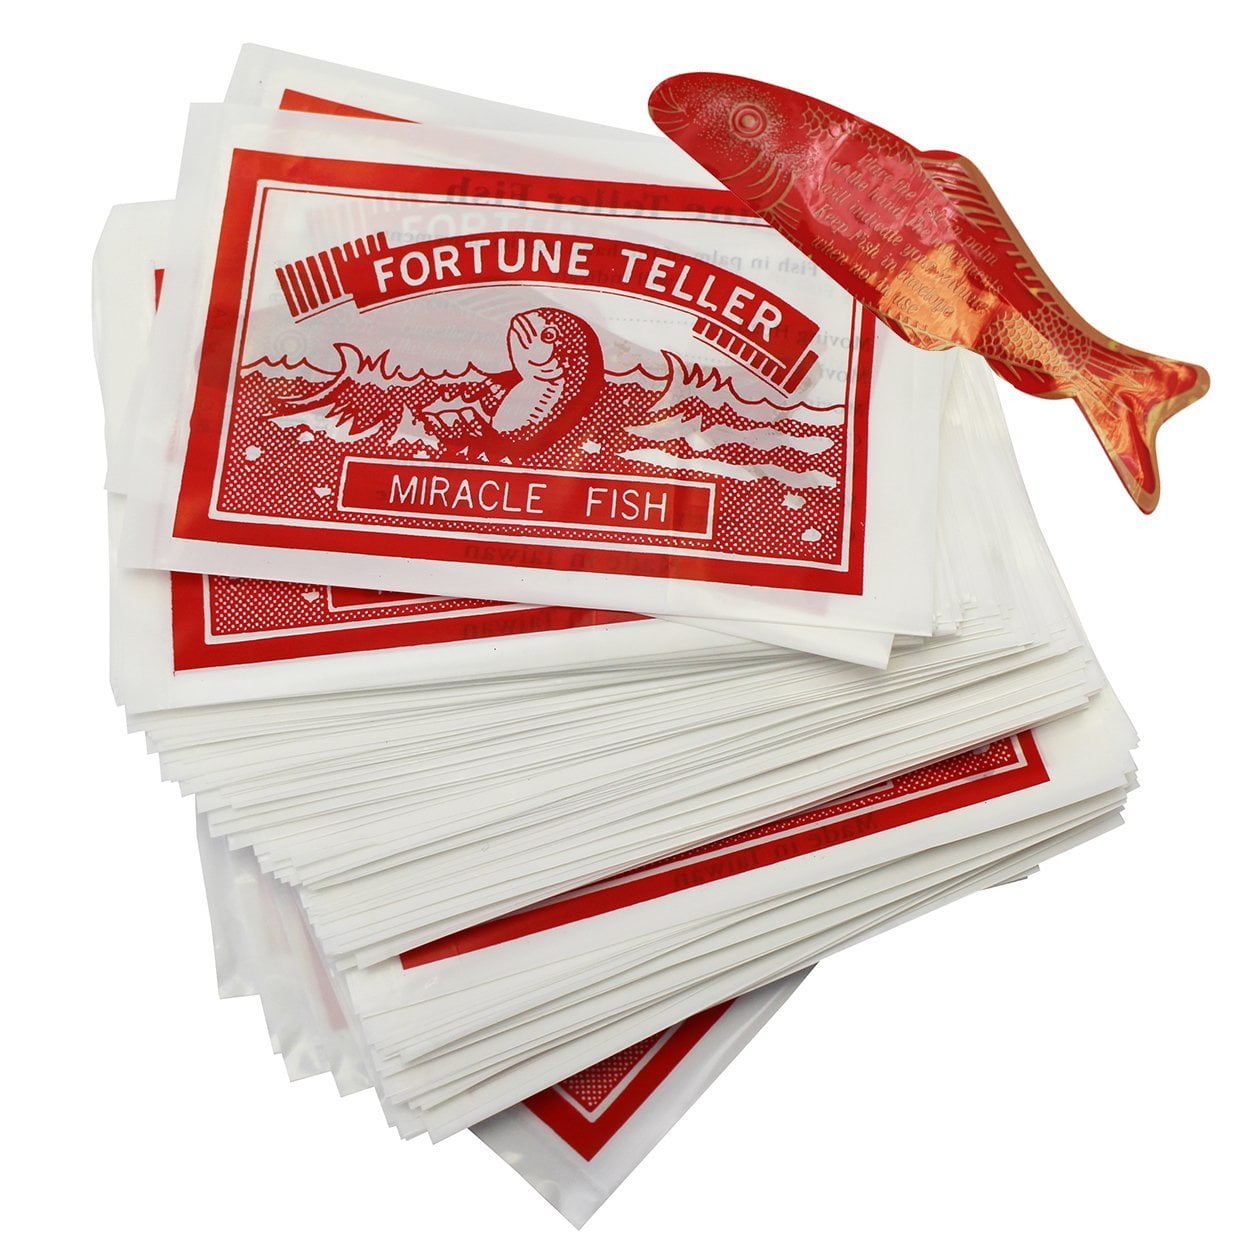 144 Fortune Teller Miracle Fish Fortune Telling Fish